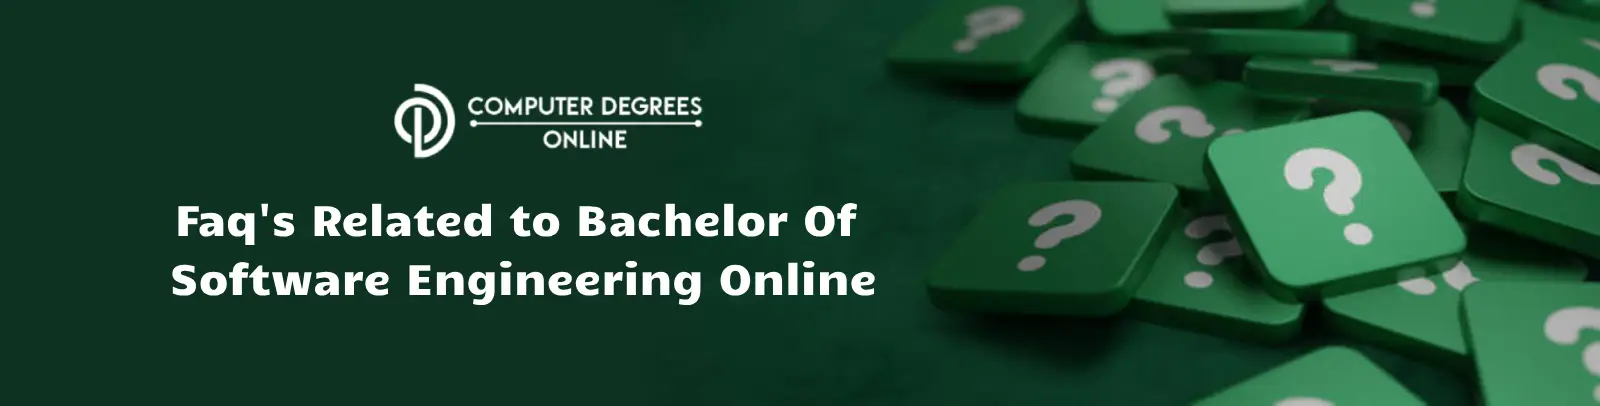 image with a green background with a bunch of question mark placed once side and a text faqs related to bachelors of software engineering online  written